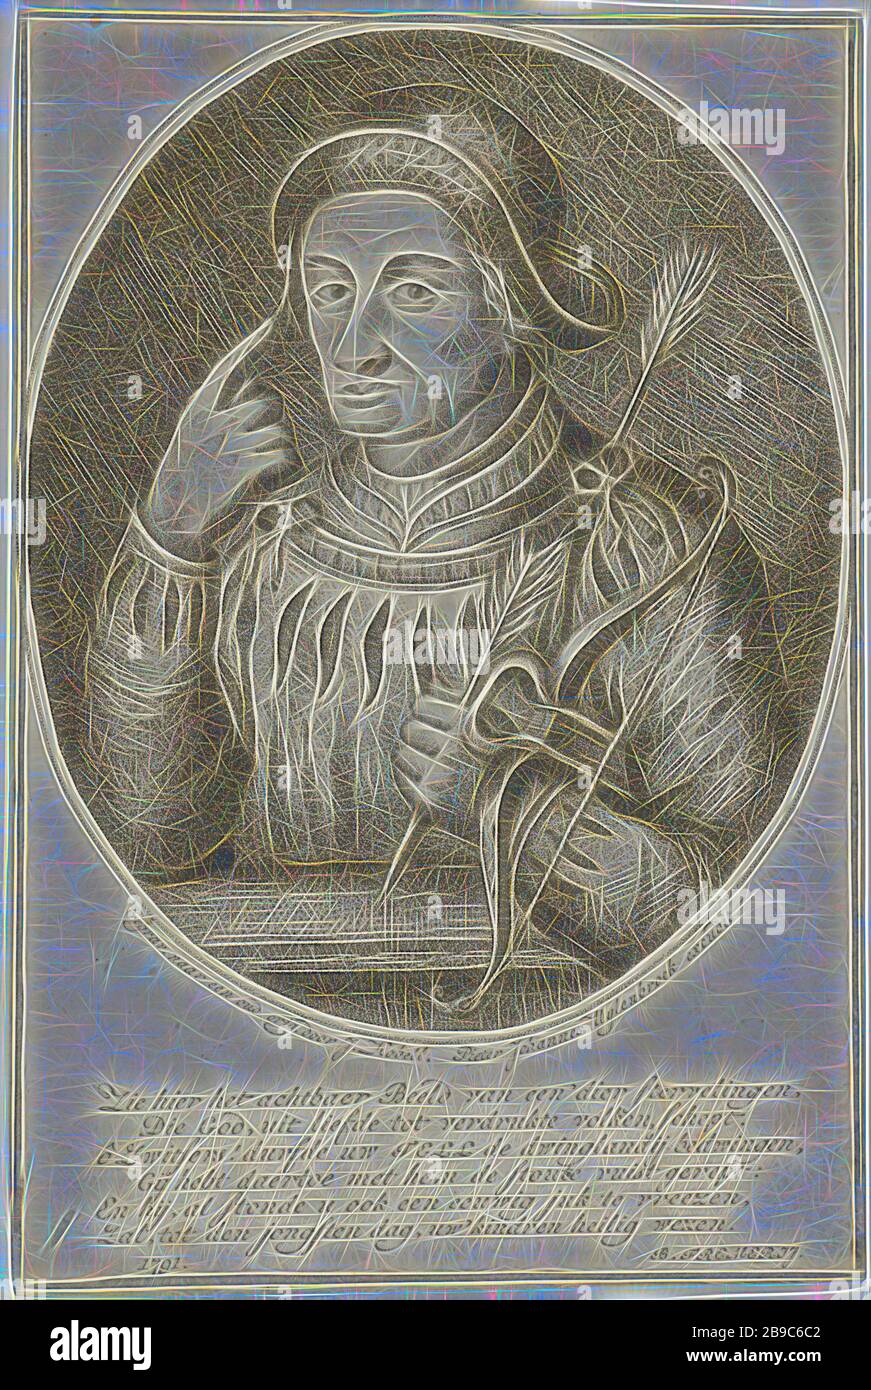 Willem Tell, The crossbowman Willem Tell, points to his eyes, holds a crossbow under his left arm and an arrow in his hand. He is dressed in medieval fantasy clothing and has a hat on. Below image a six-line Dutch verse, William Tell, archer's weapons: bow, Jan Kobell (I) (mentioned on object), 1791, paper, etching, h 141 mm × w 95 mm, Reimagined by Gibon, design of warm cheerful glowing of brightness and light rays radiance. Classic art reinvented with a modern twist. Photography inspired by futurism, embracing dynamic energy of modern technology, movement, speed and revolutionize culture. Stock Photo